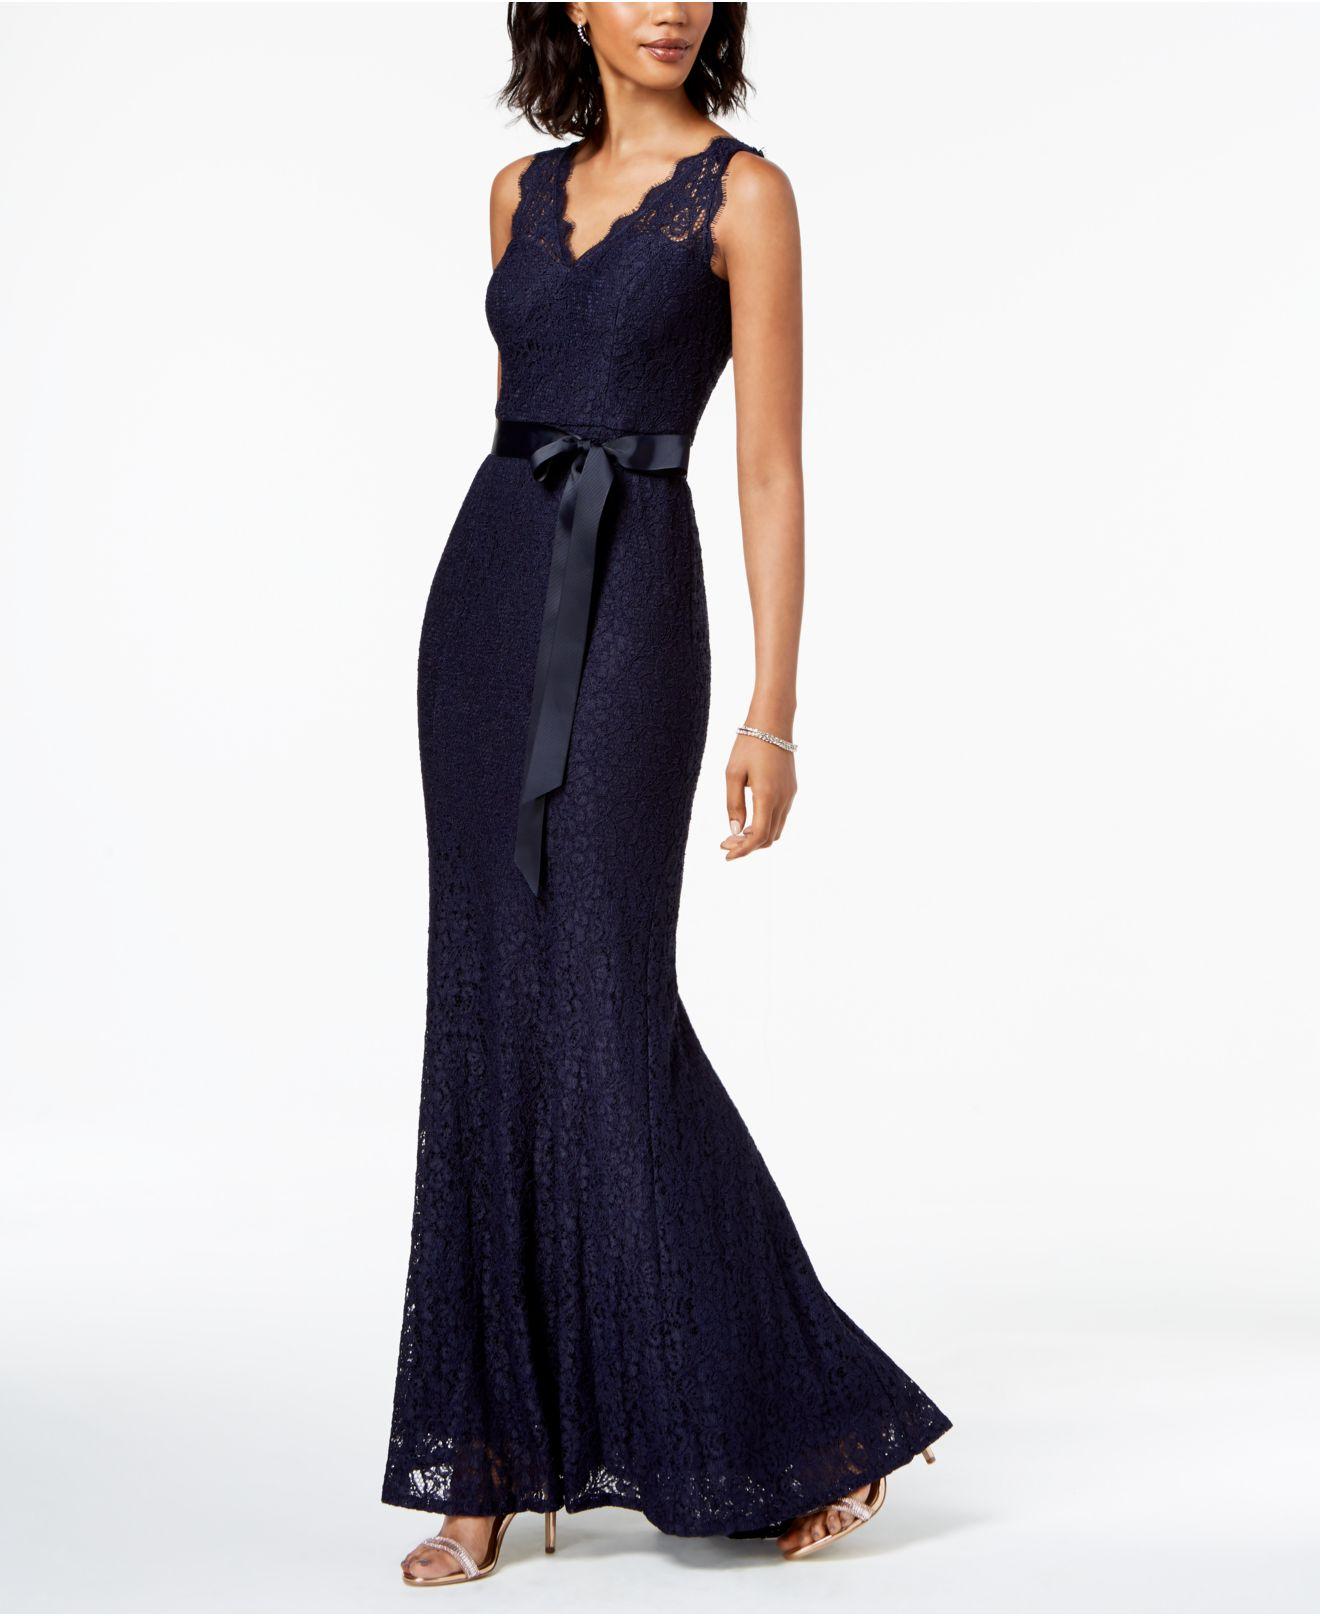 semestre Descompostura Antídoto Adrianna Papell Lace V-neck Satin Sash Gown in Blue | Lyst